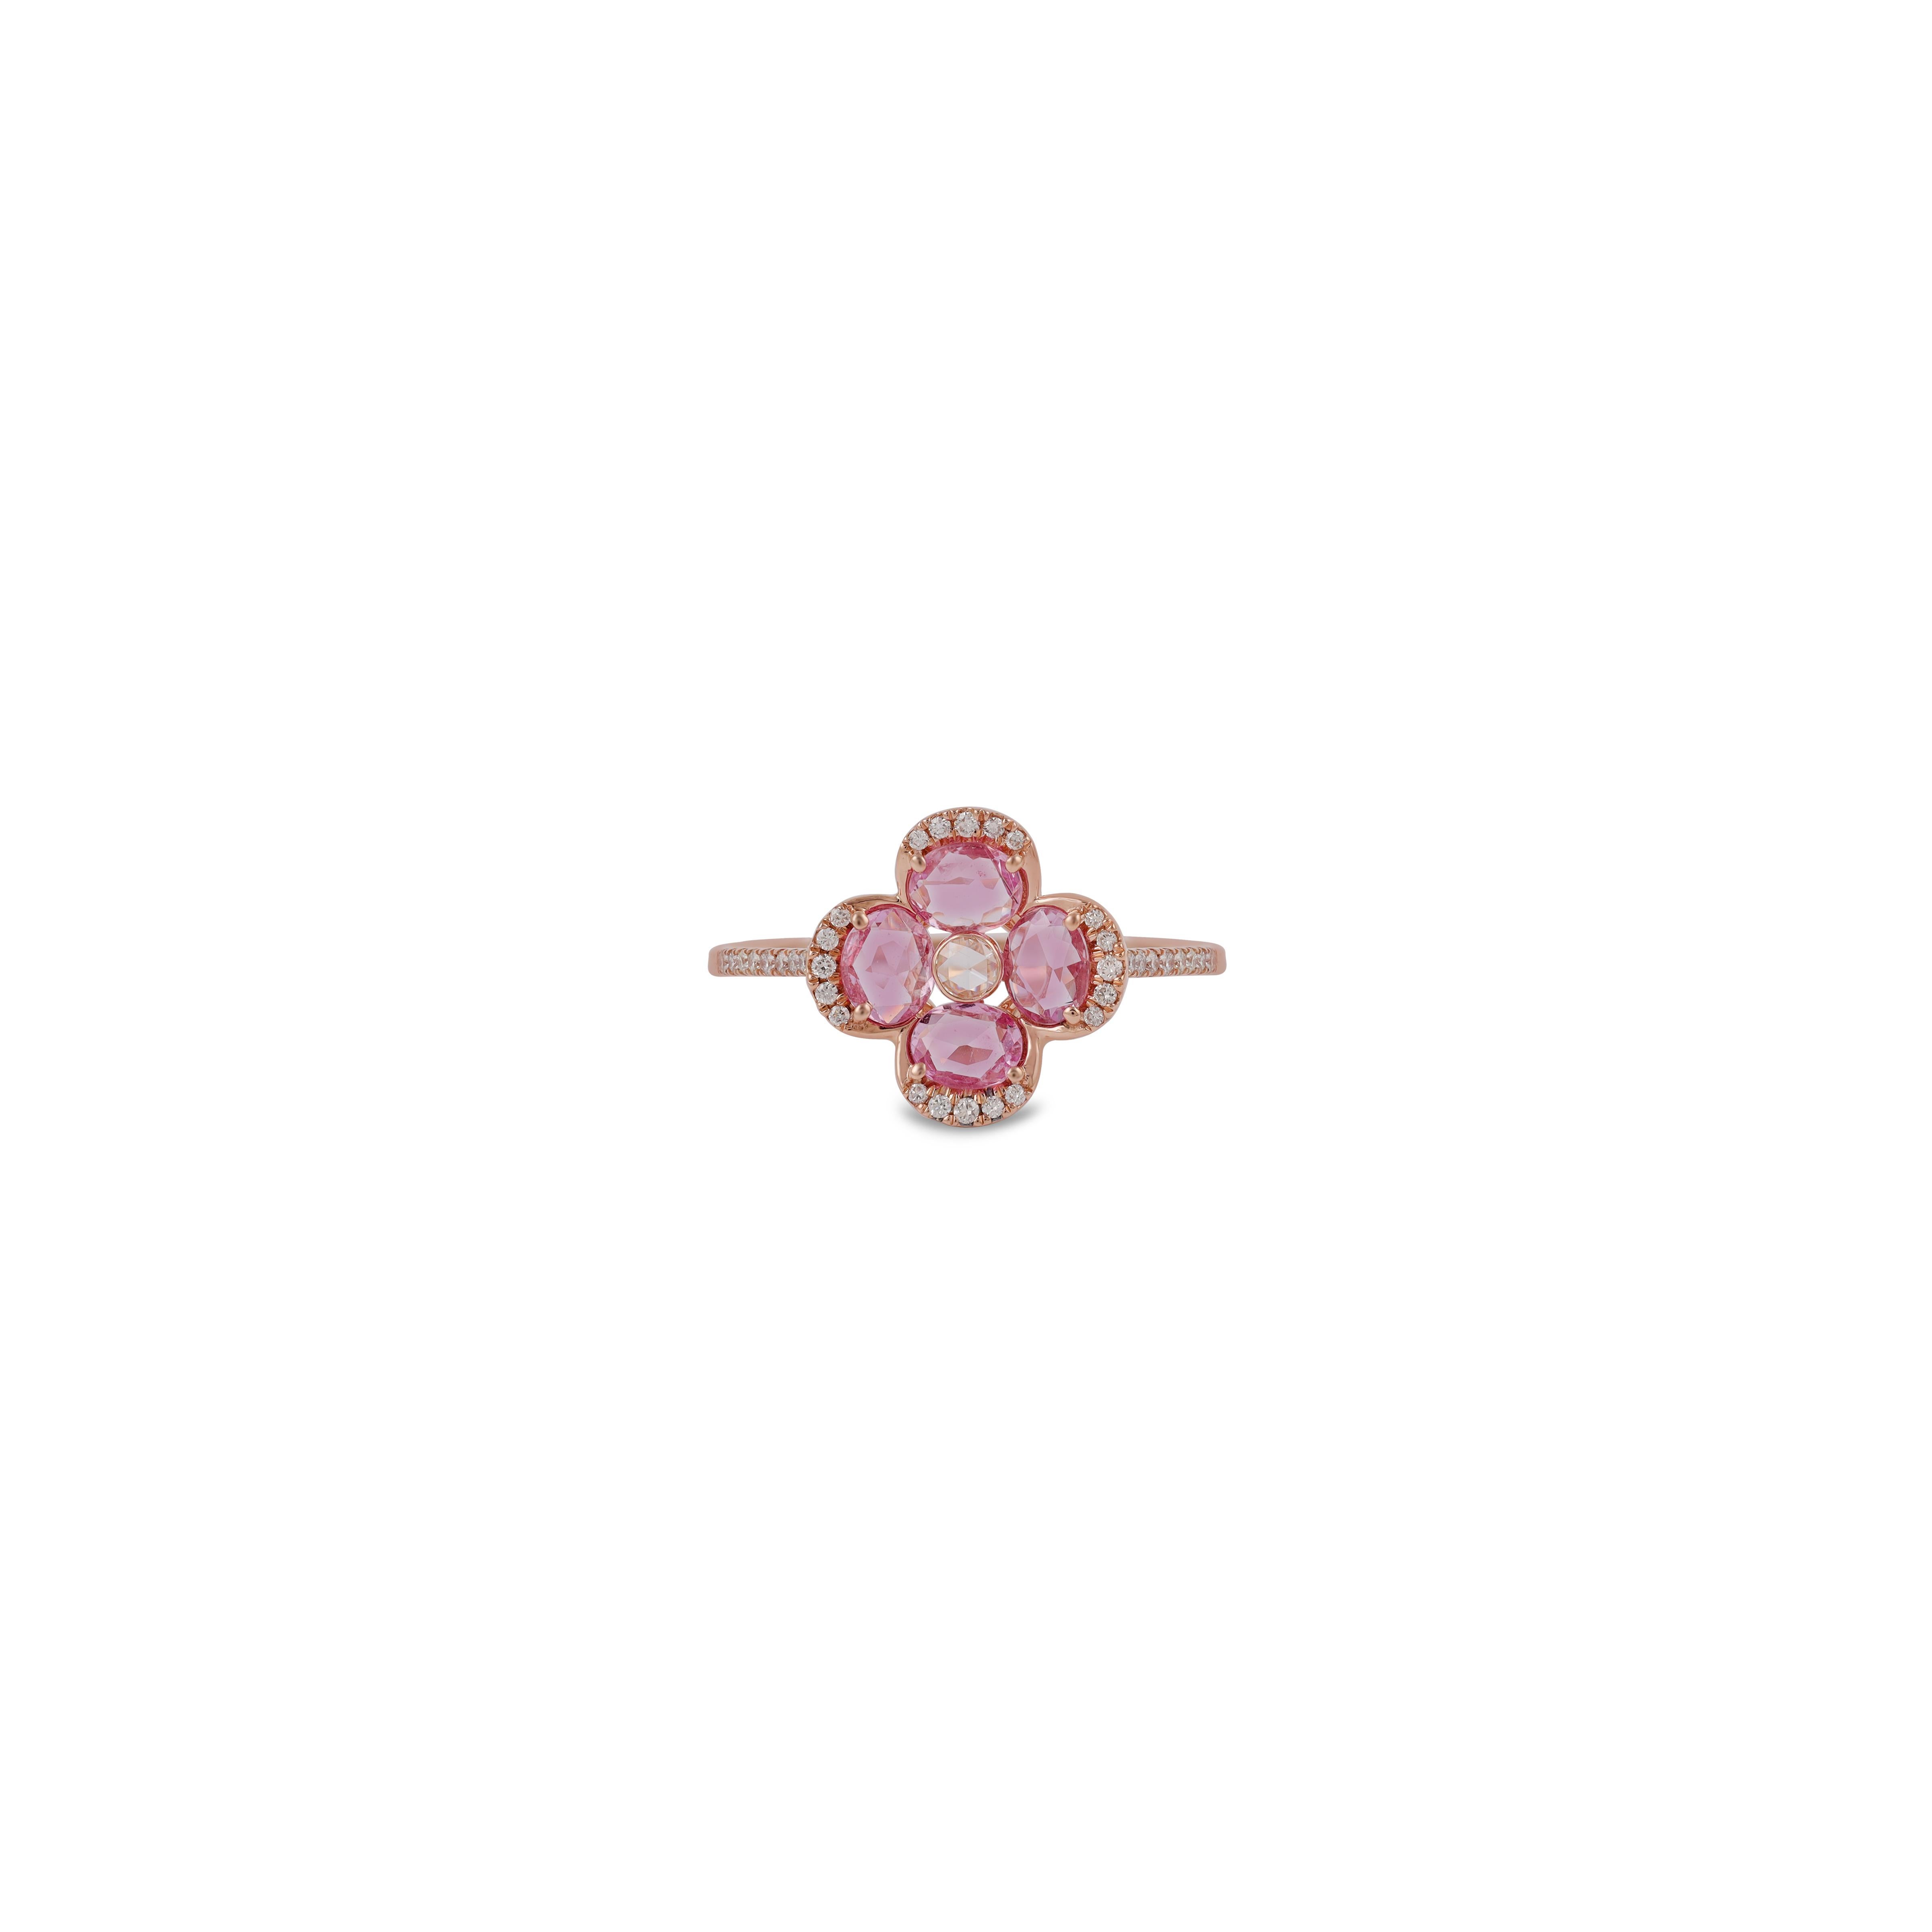 This is an elegant Pink Sapphire & diamond ring studded in 18k Rose gold features a fine quality of Oval-shaped Pink Sapphire 1.41 carats with 1 Diamond 0.08carats, Diamond 0.17 Carat this entire ring is made in 18k Rose gold weight 3.10 grams, it